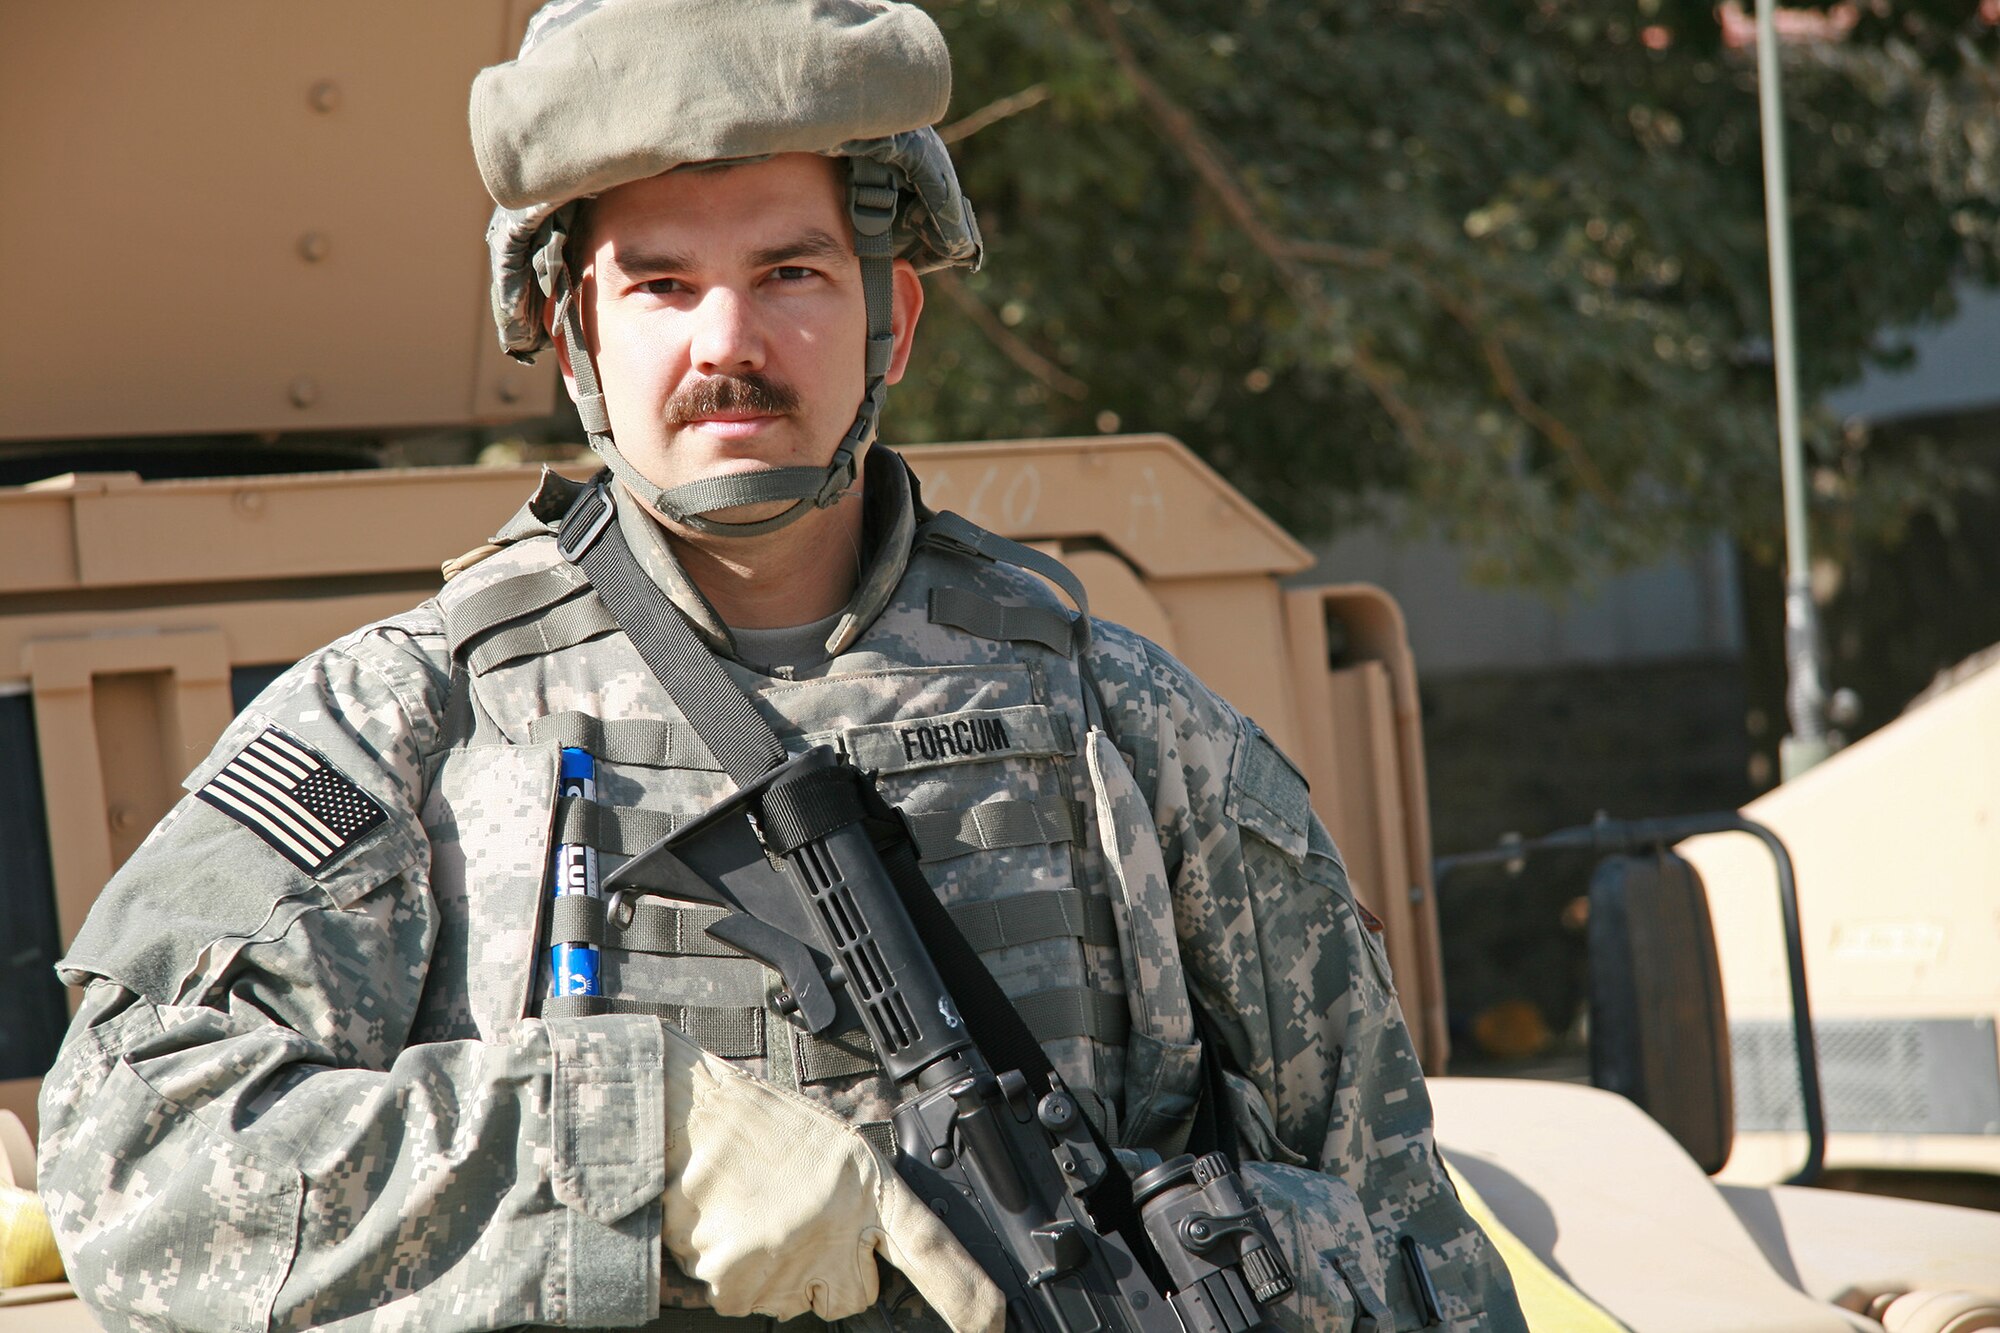 Then Maj. Craig Forcum, now 341st Medical Group commander, gets ready to go out on a convoy October 2007, near Camp Eggers in Kabul, Afghanistan. Forcum has been deployed to Afghanistan, Germany and Kyrgyzstan, and has traveled to more than 35 countries. Some of his assignments include Royal Air Force Lakenheath, England; Joint Base Pearl Harbor-Hickam, Hawaii, and Kadena Air Base, Japan. (Courtesy photo)